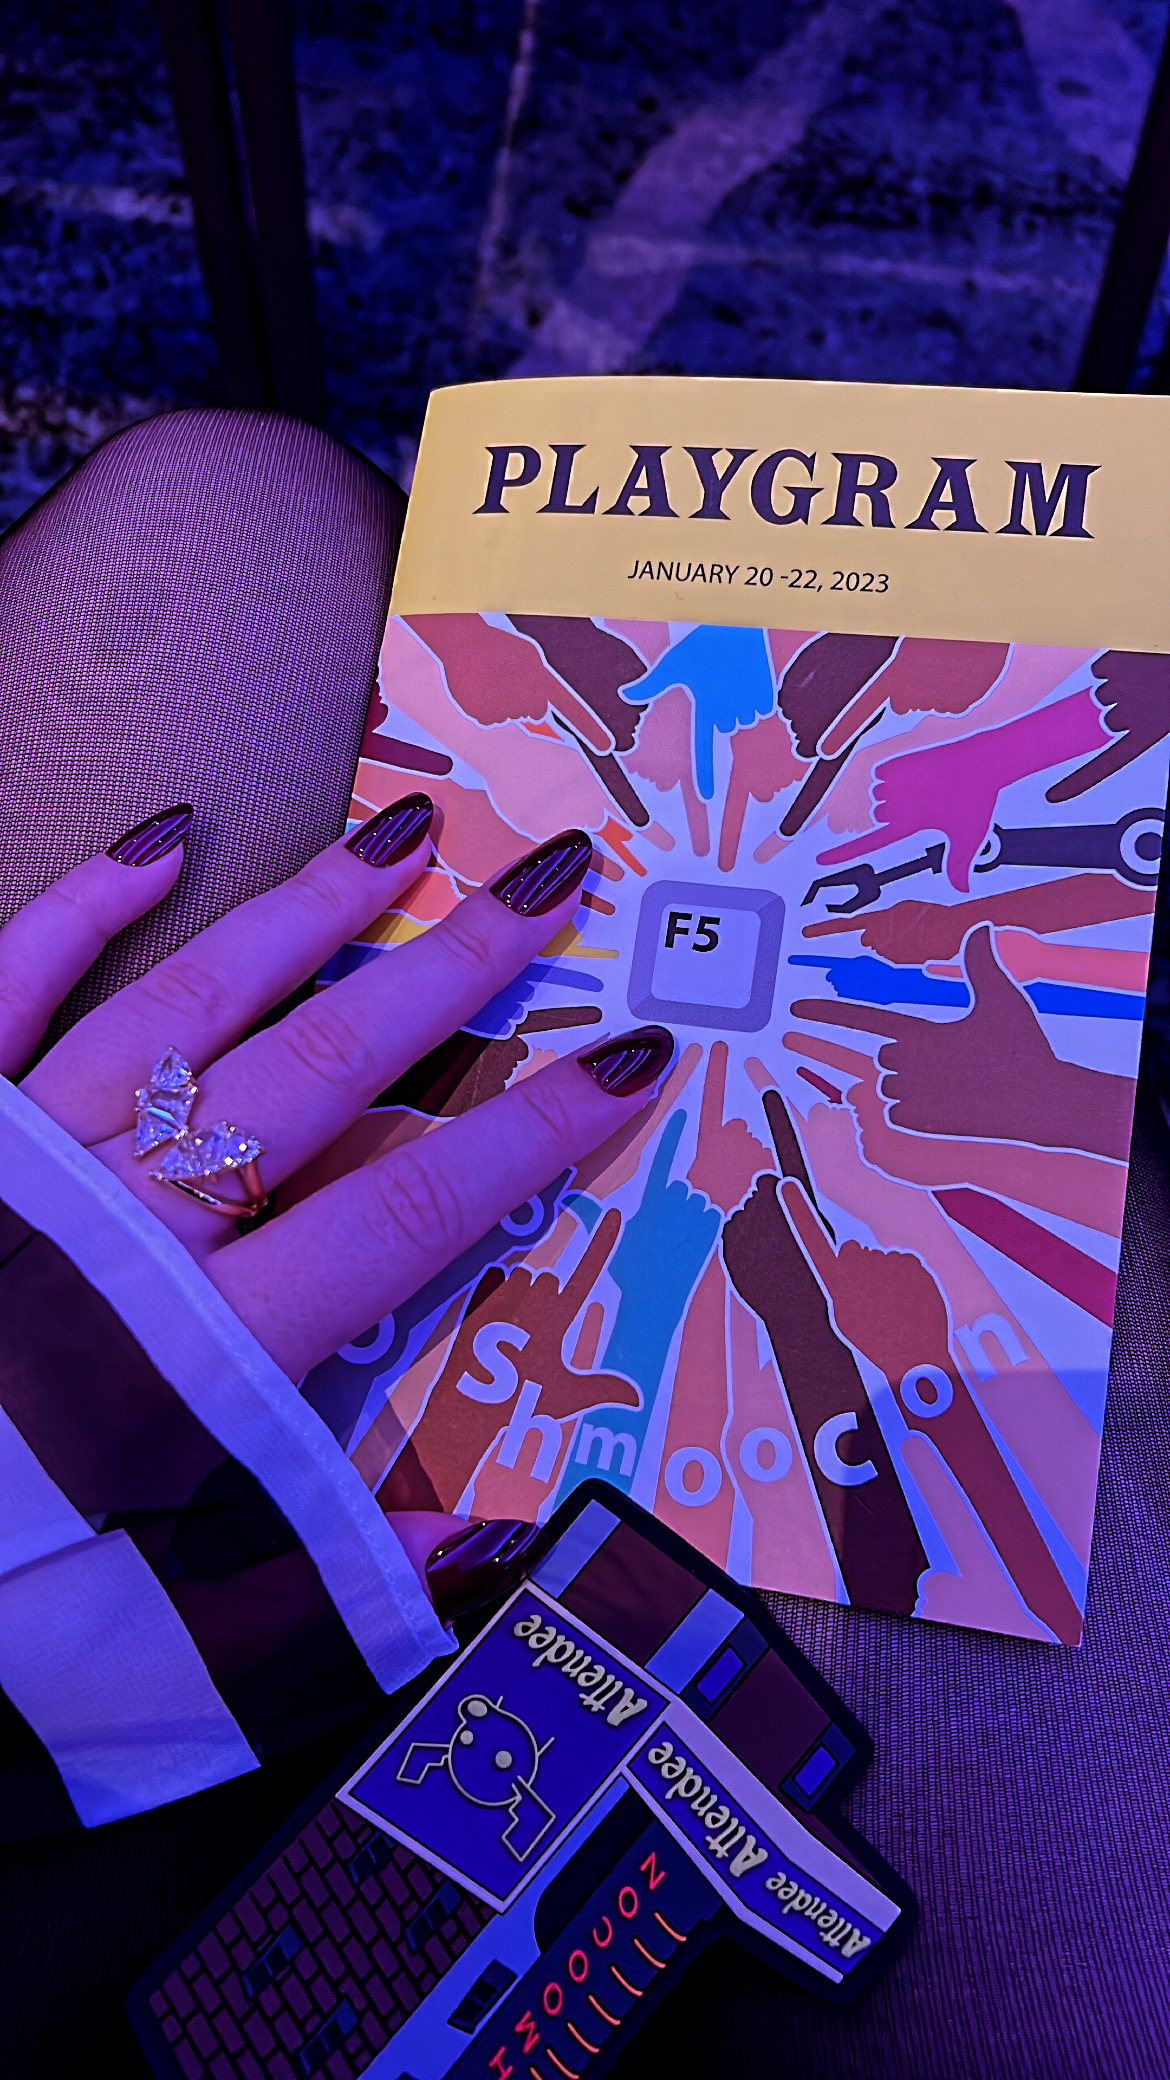 Playbill/Playgram booklet of talks, challenges, and schedule. Featuring one of three attendee badges which each represent a different Broadway theater. My badge resembled the New Amsterdam theater. I was hoping to get the Richard Rodgers theater because of Hamilton though.